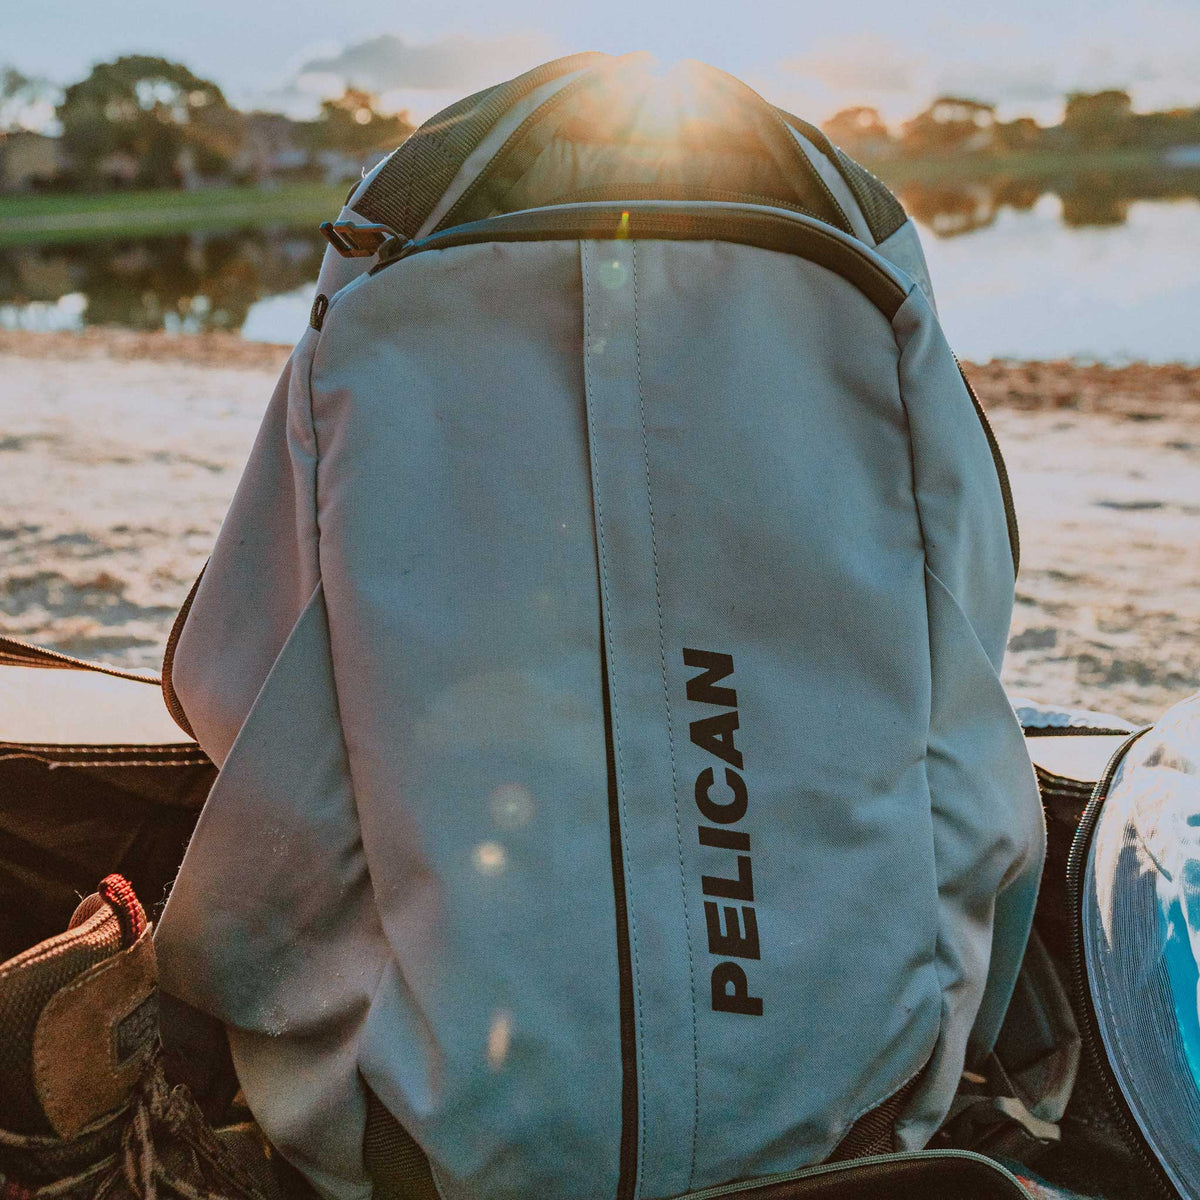 Pelican MPB20 Backpack being used outside at the beach